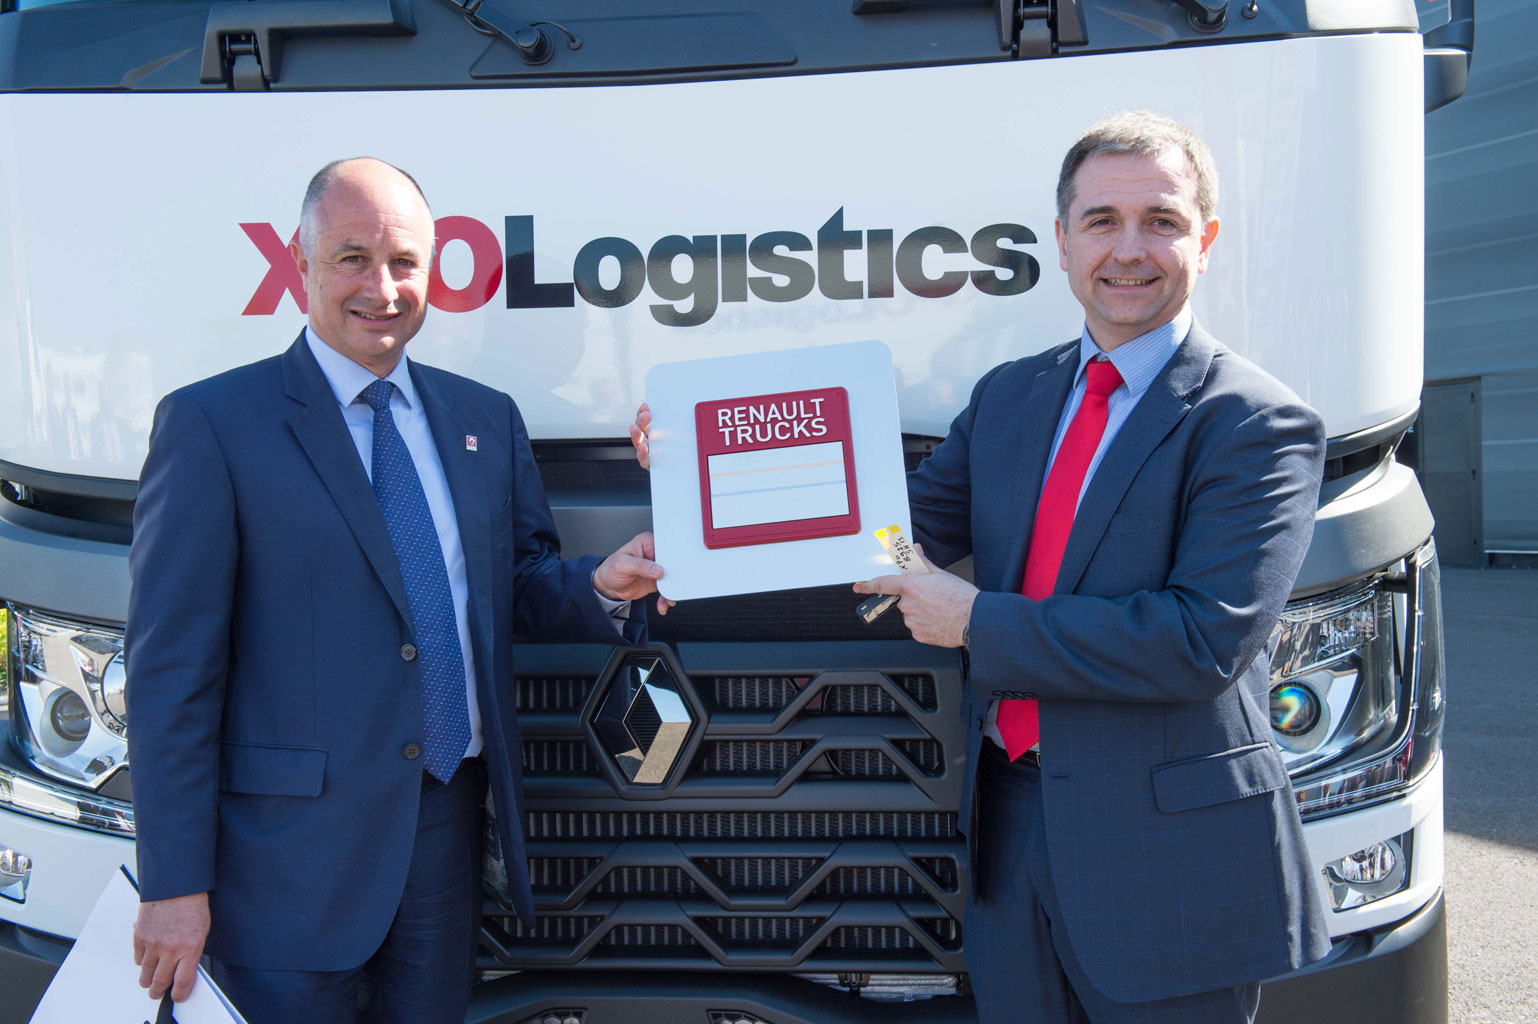 XPO logistic renault truck